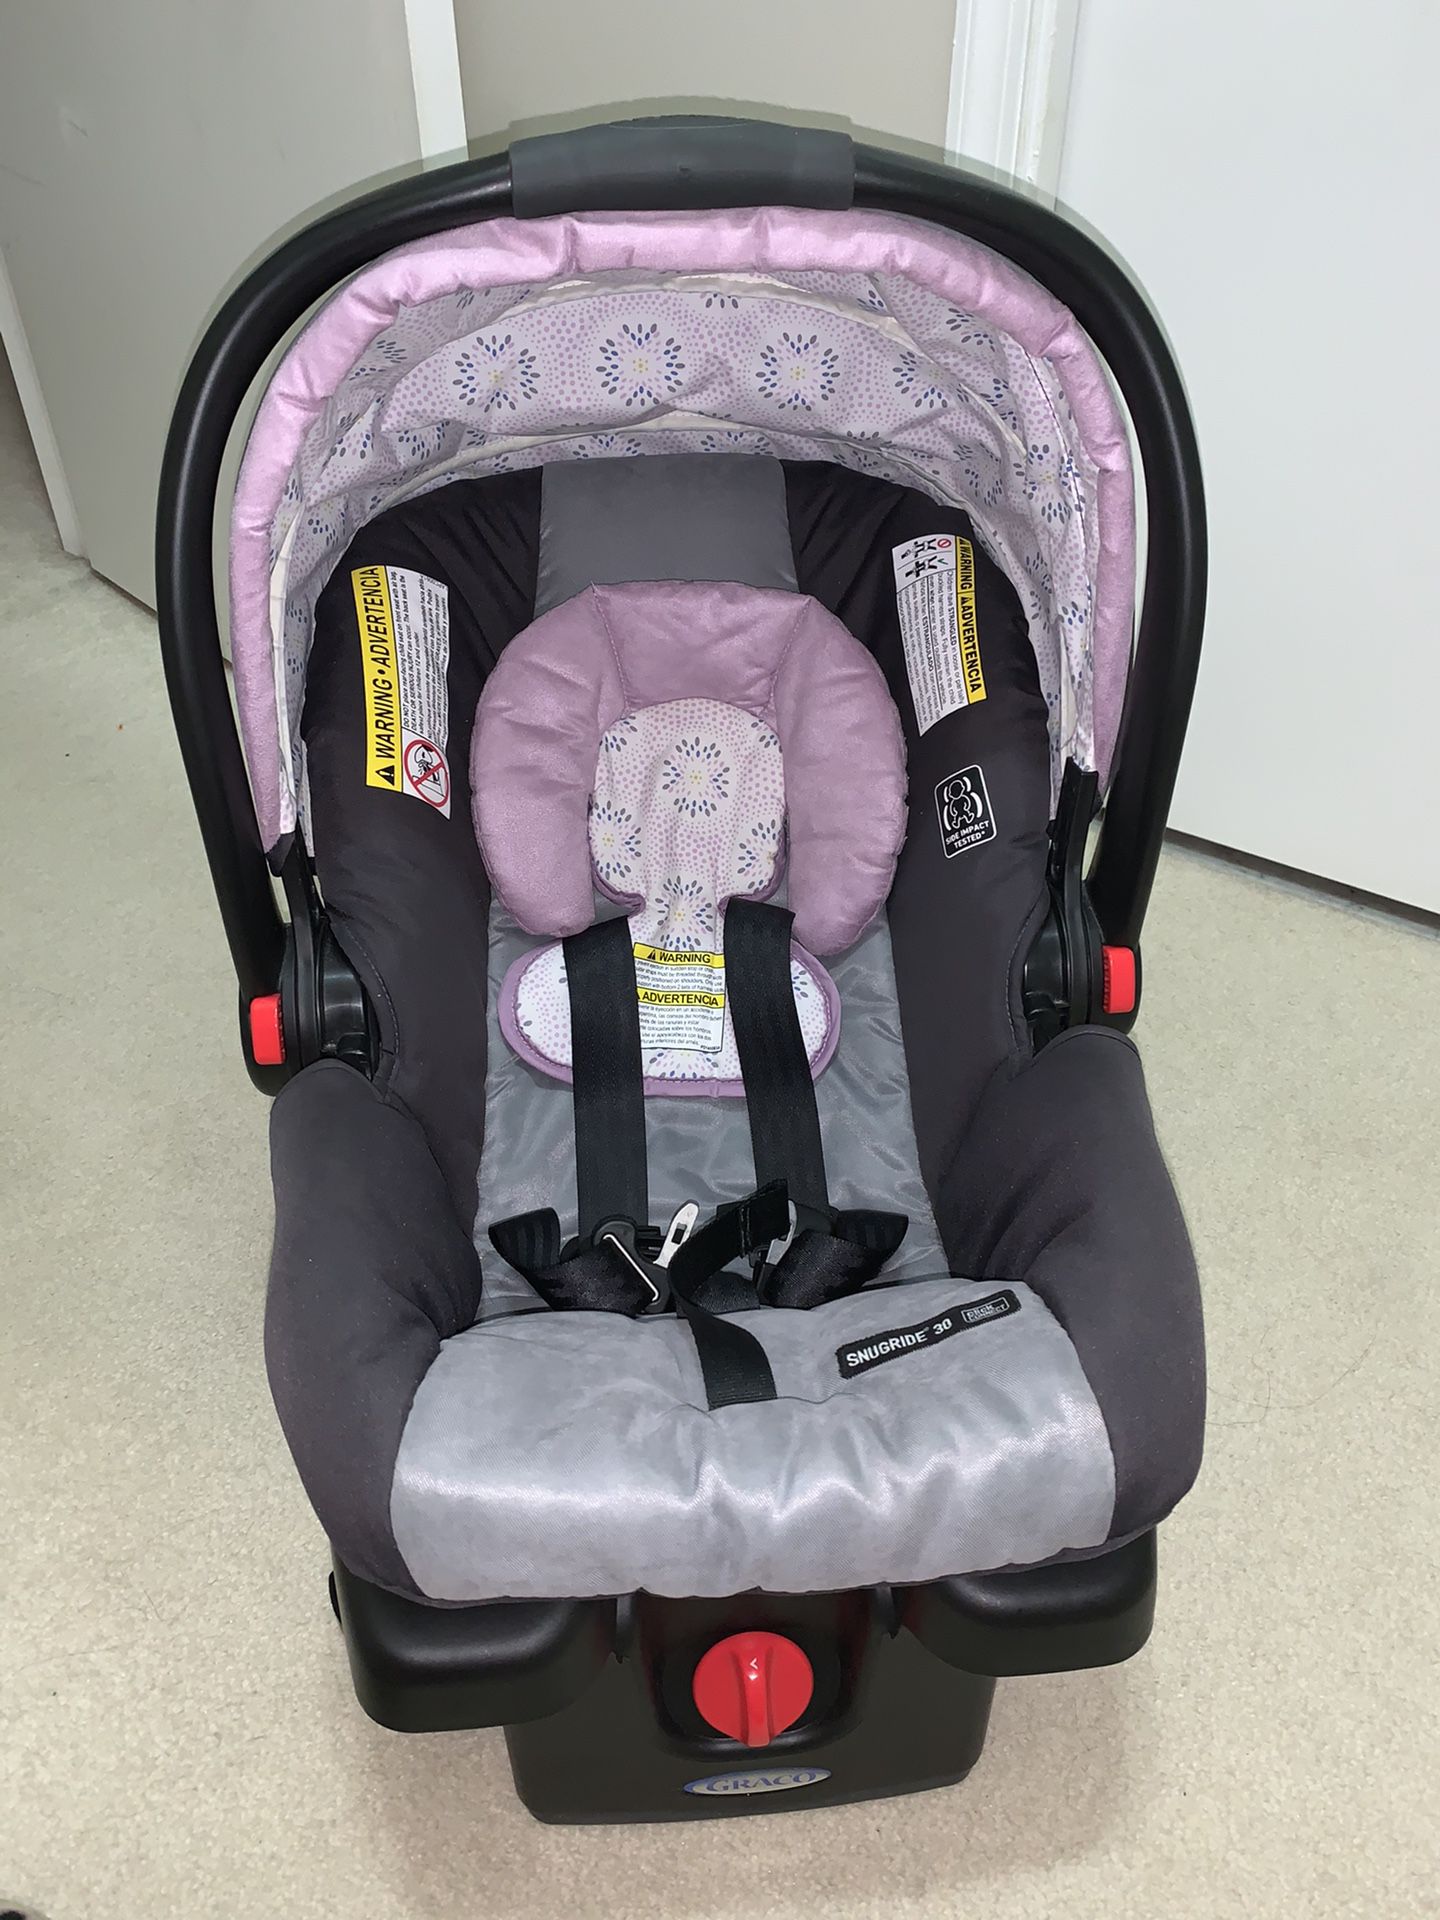 Graco Click Connect Infant Girl Car Seat and Base